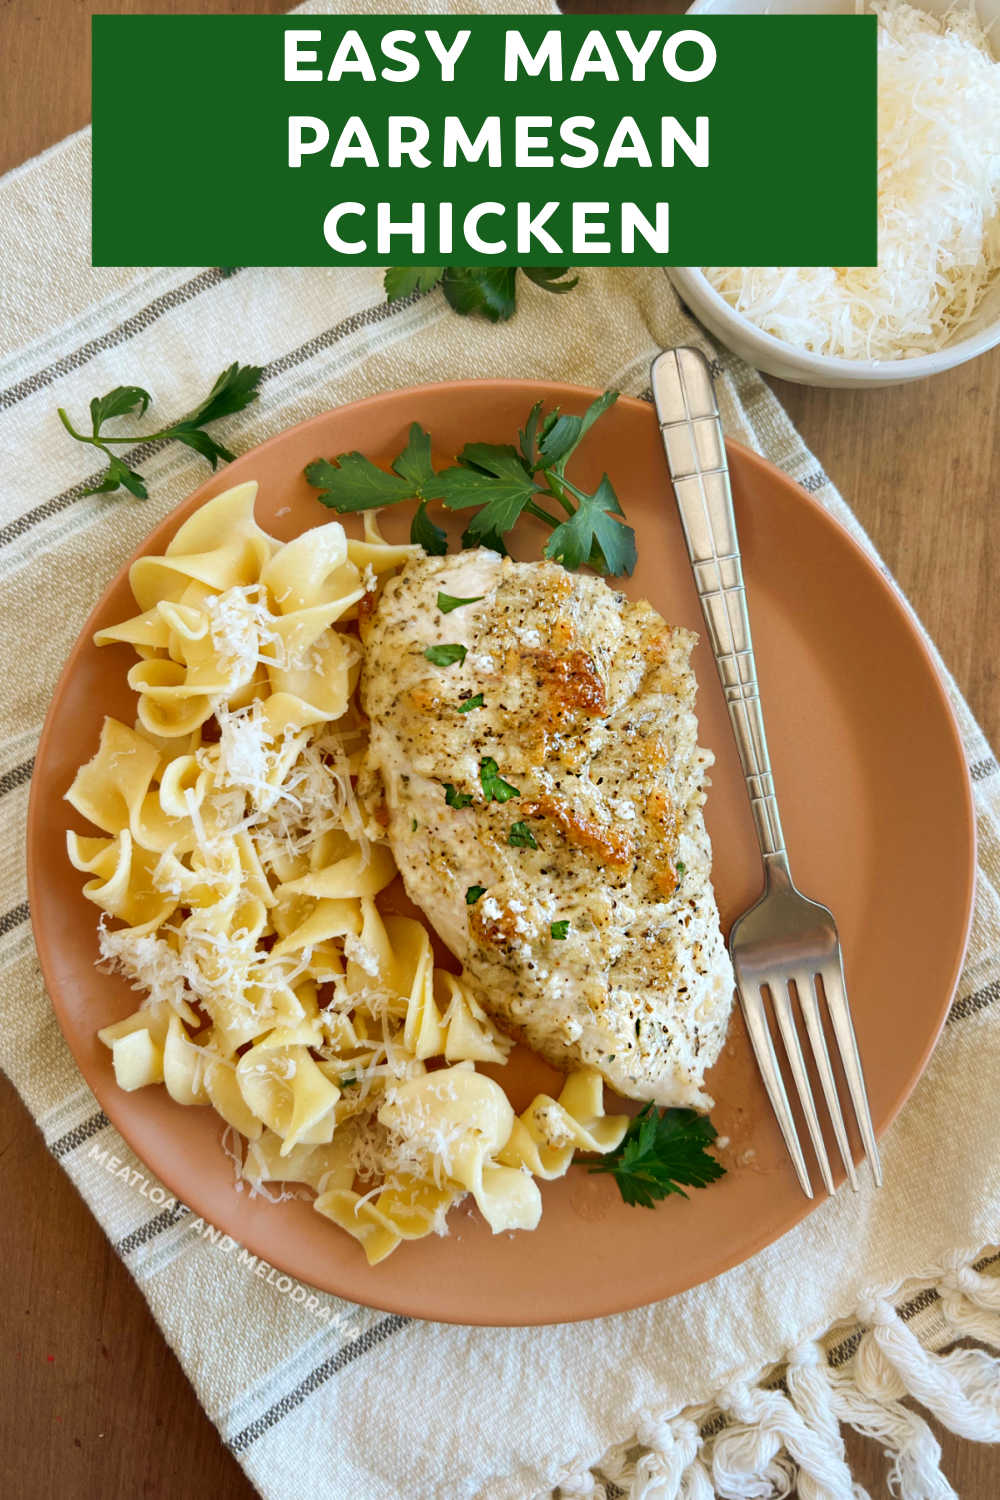 Easy Mayo Parmesan Chicken without breadcrumbs is a delicious recipe using chicken with mayonnaise and Parmesan cheese. An easy weeknight meal and a family favorite that is also budget friendly!  via @meamel